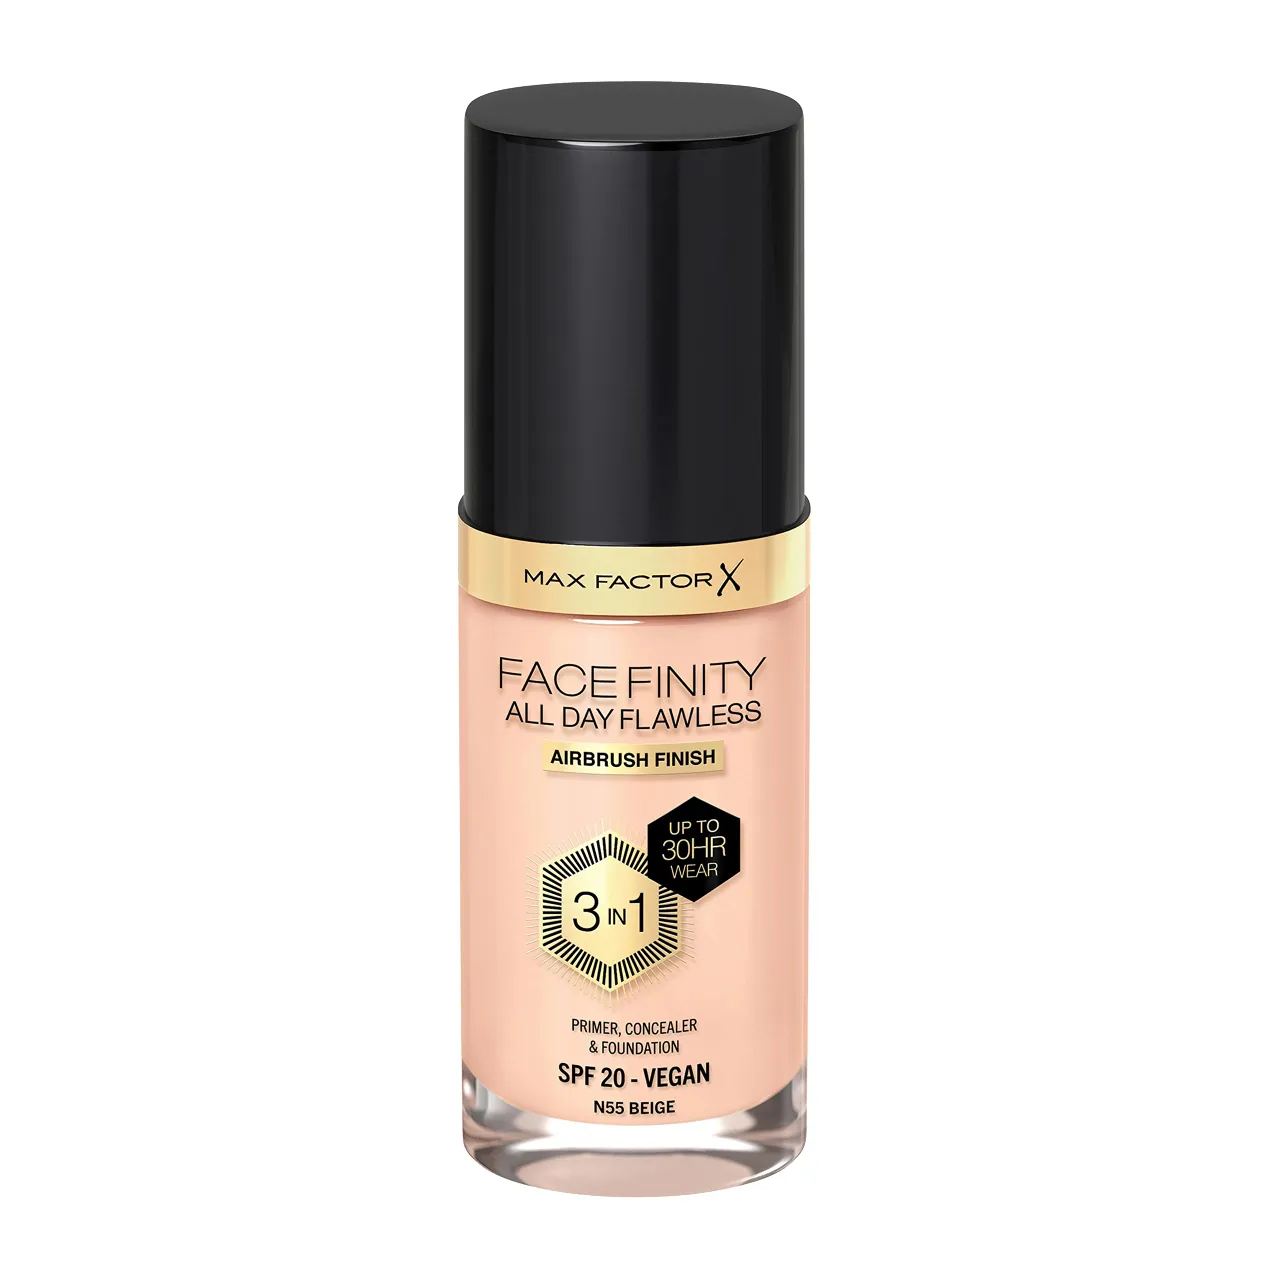 Max Factor Facefinity All Day Flawless Make-up